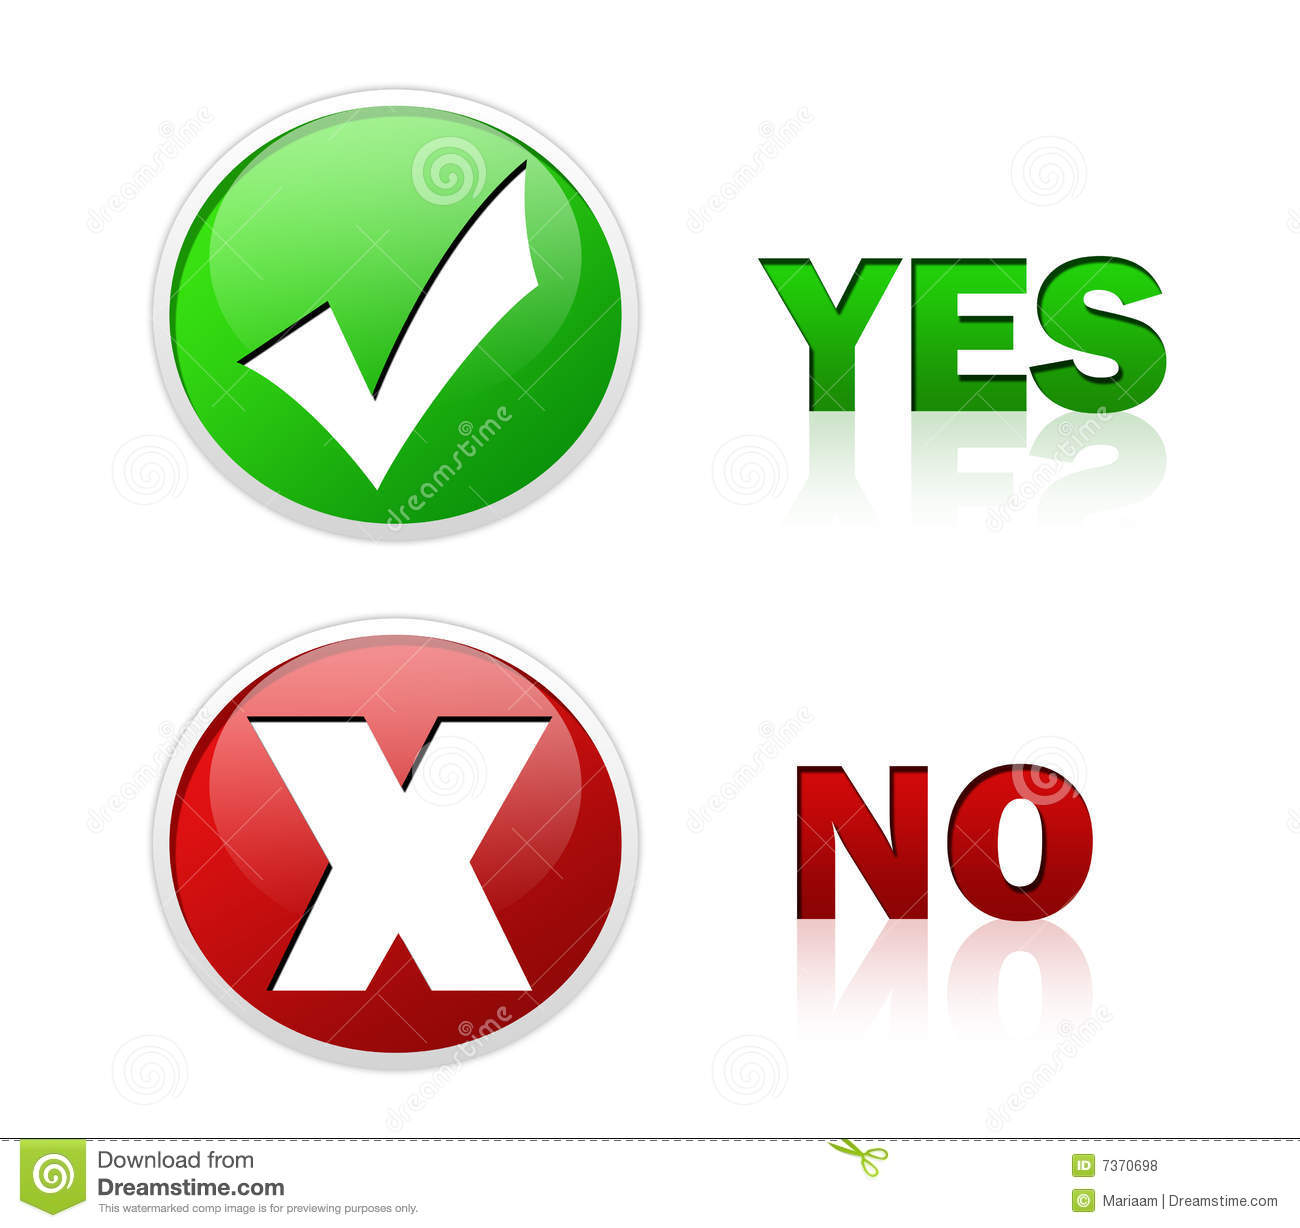 Top 92+ Pictures Symbol For Yes And No Full HD, 2k, 4k